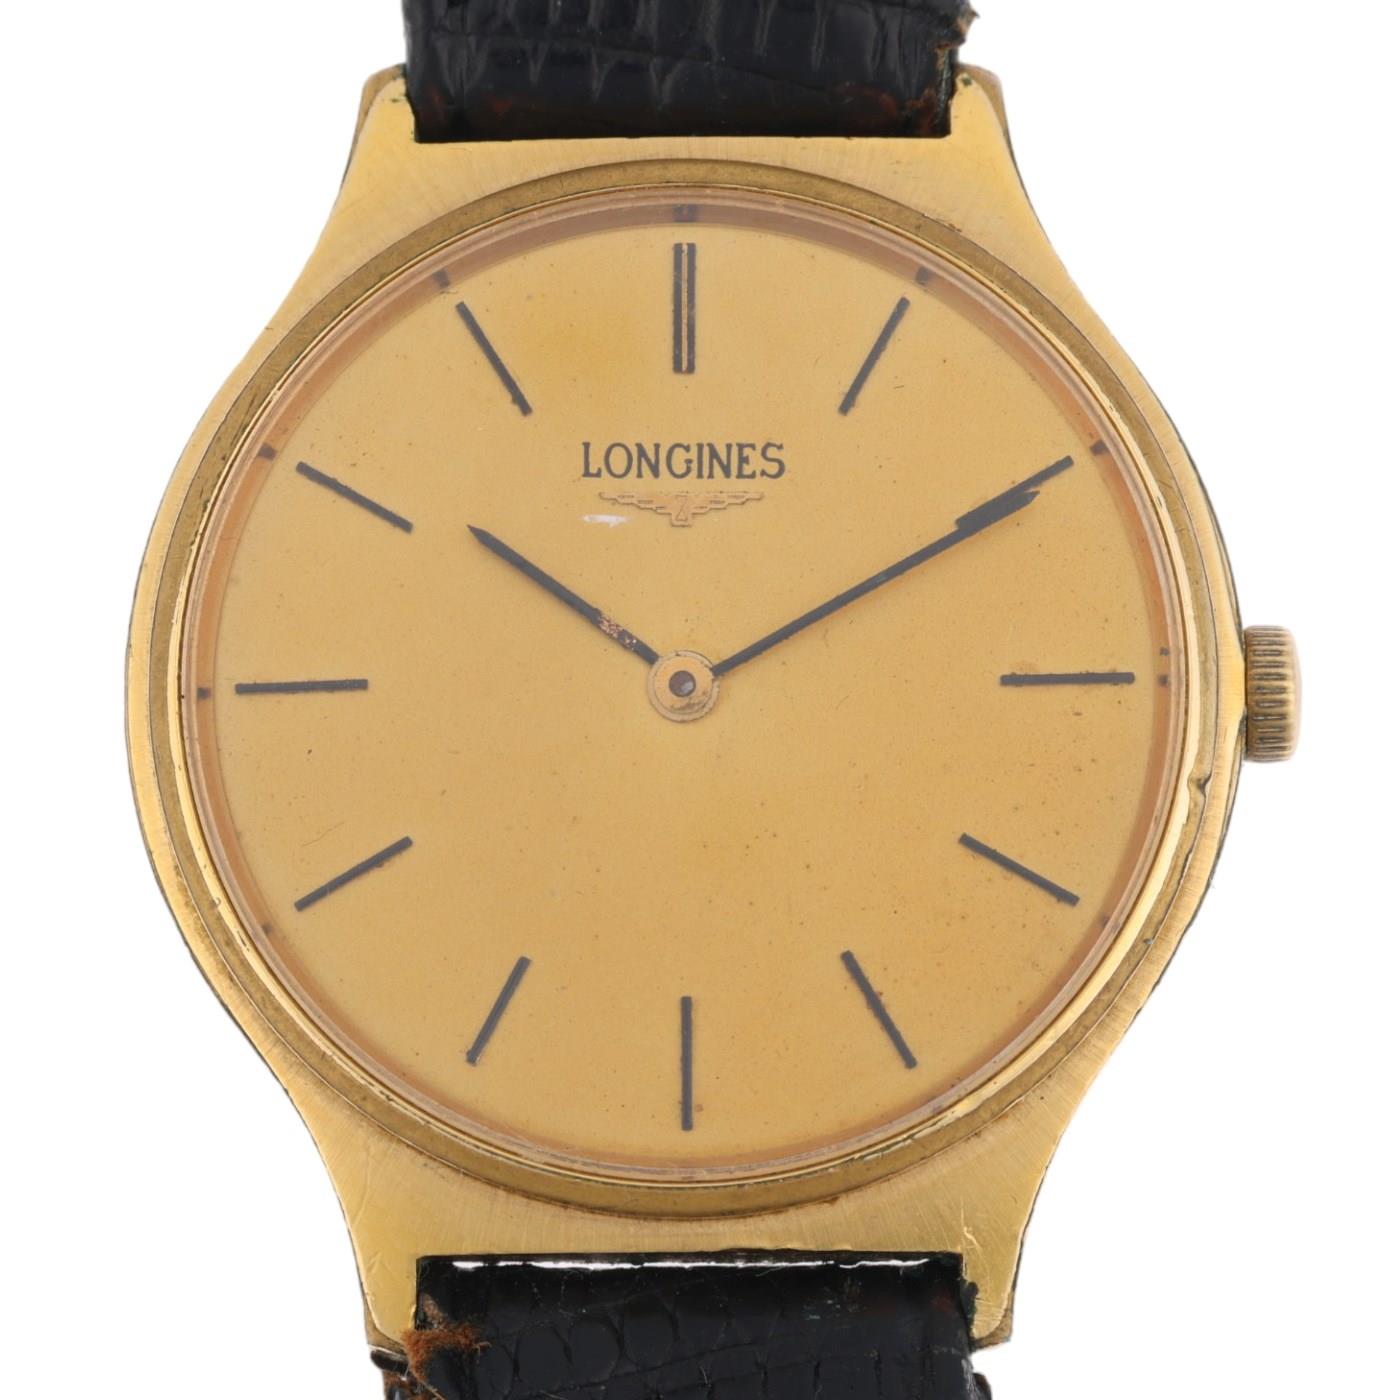 LONGINES - a gold plated stainless steel mechanical wristwatch, ref. 4427 847, circa 1970s,